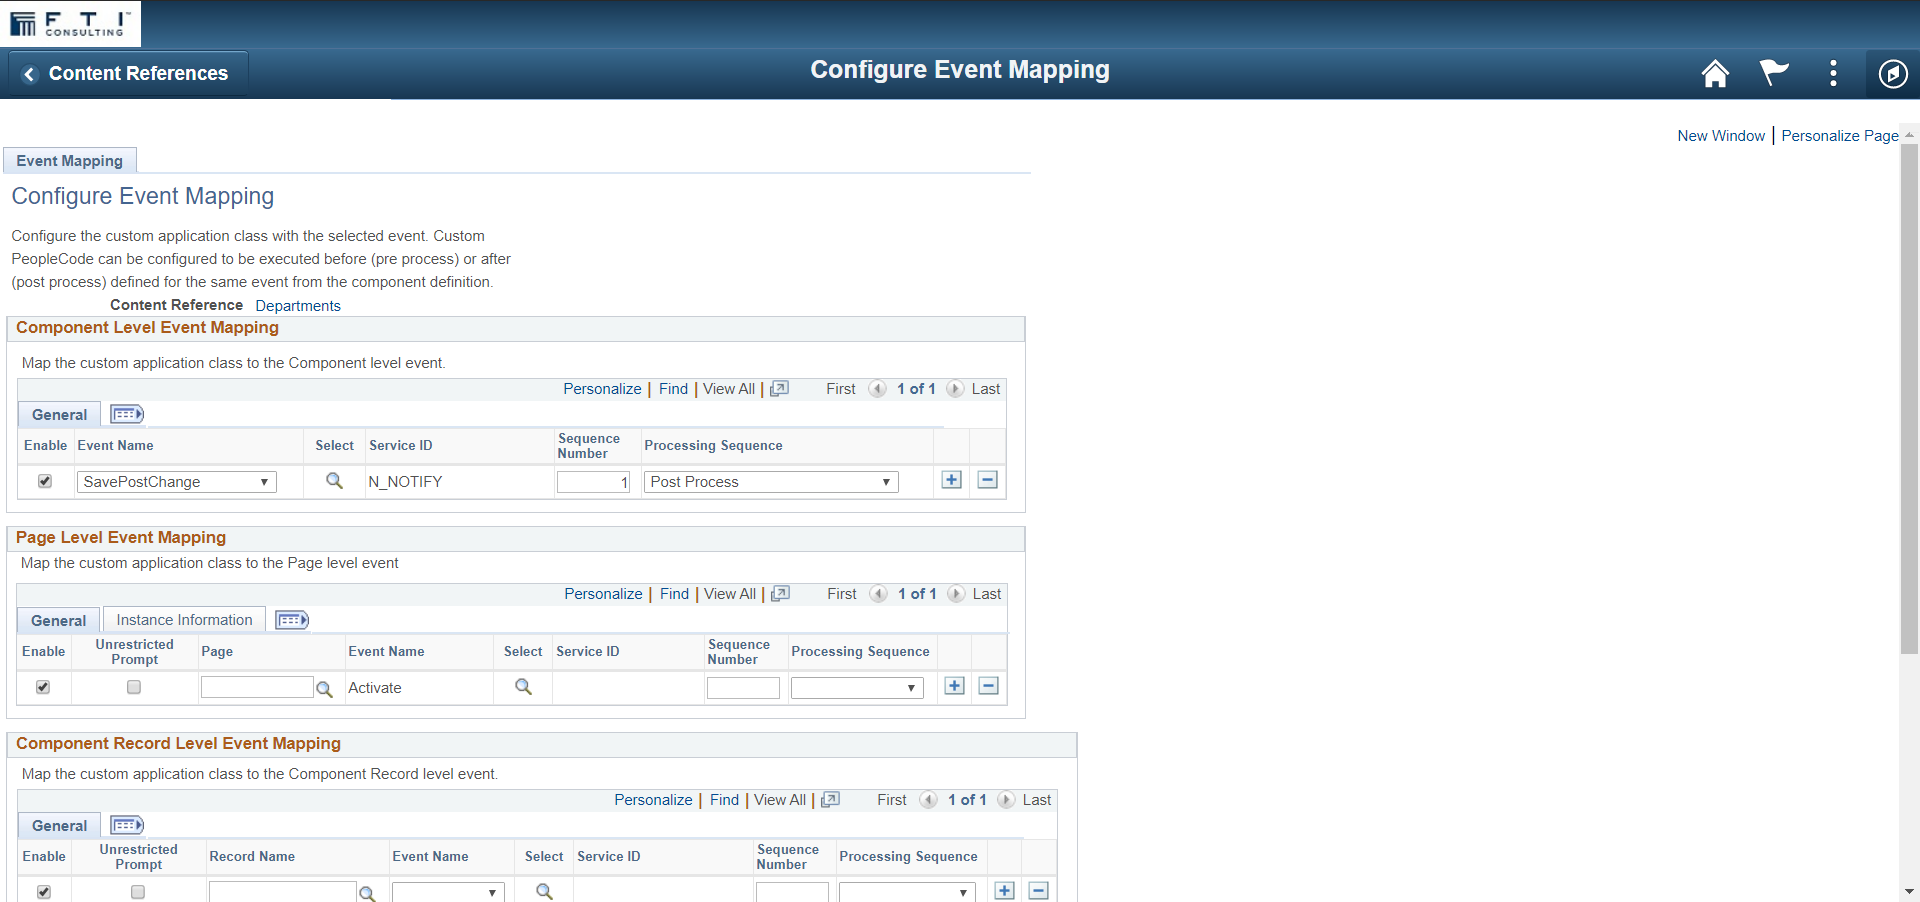 Configure Event Mapping page